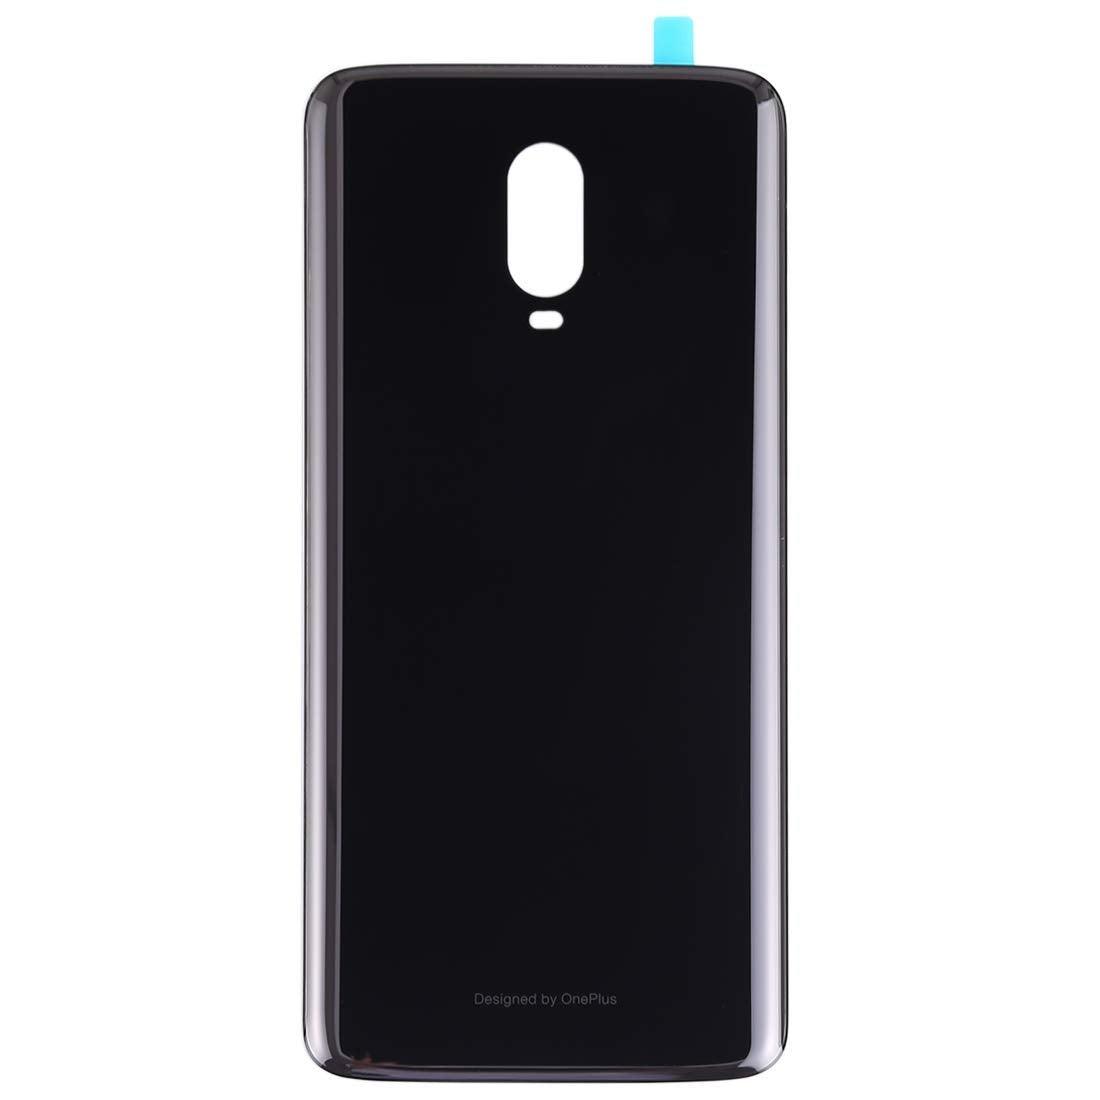 Back Glass for Oneplus 6T Black